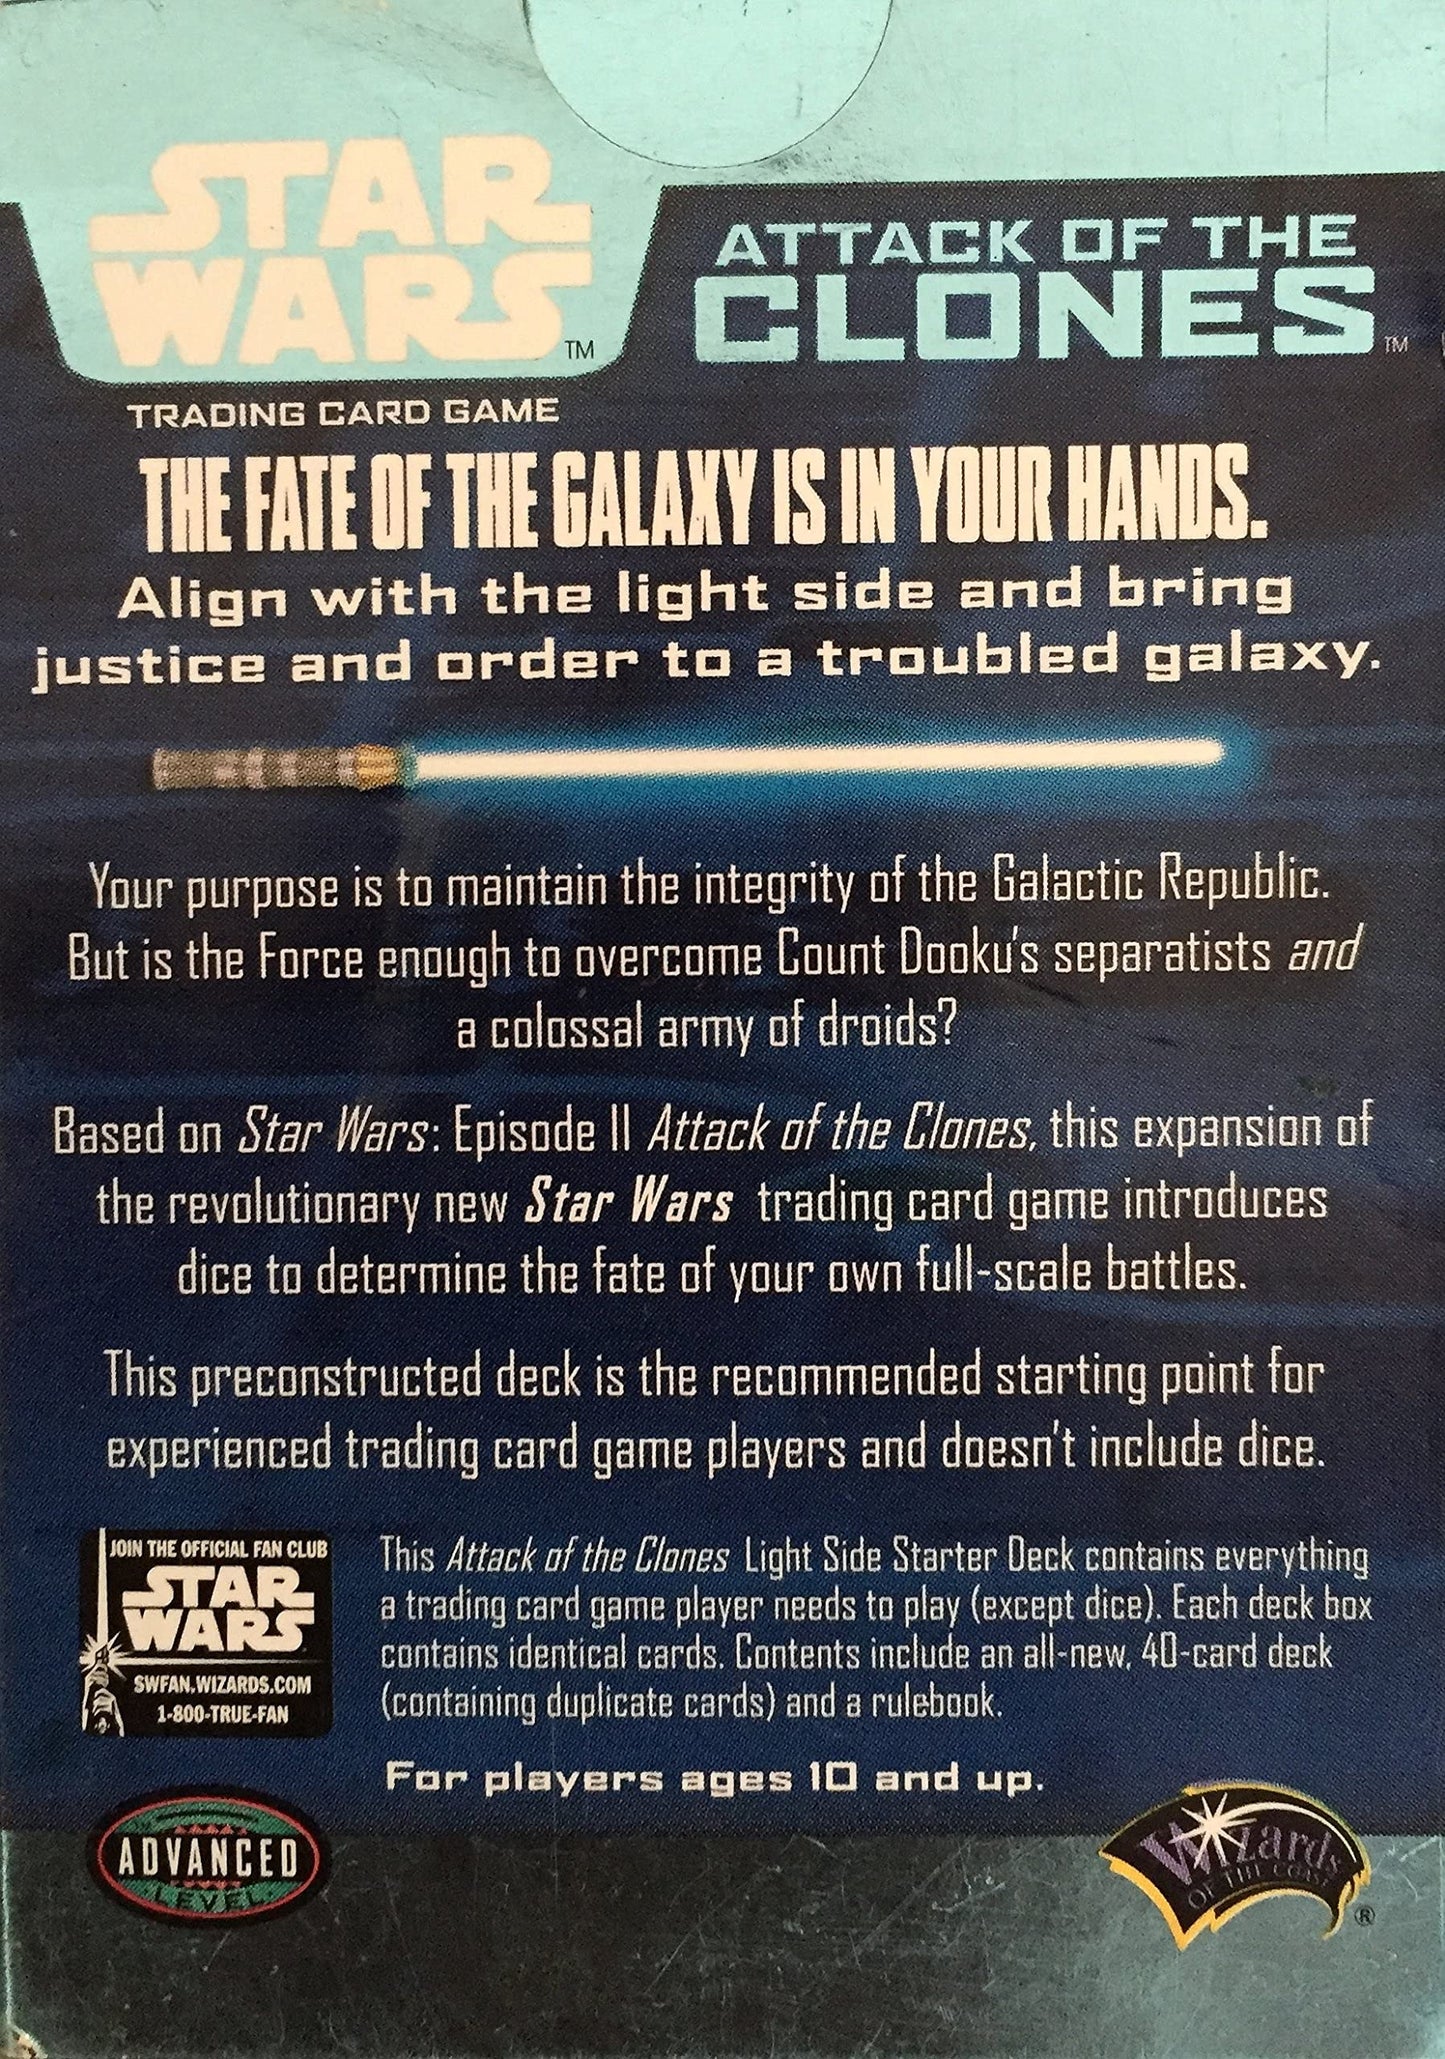 Star Wars Attack Of The Clones Light Side Starter Deck Trading Card Game. The Fate Of The Galaxy Is In Your Hands - Shop Stock Room Find